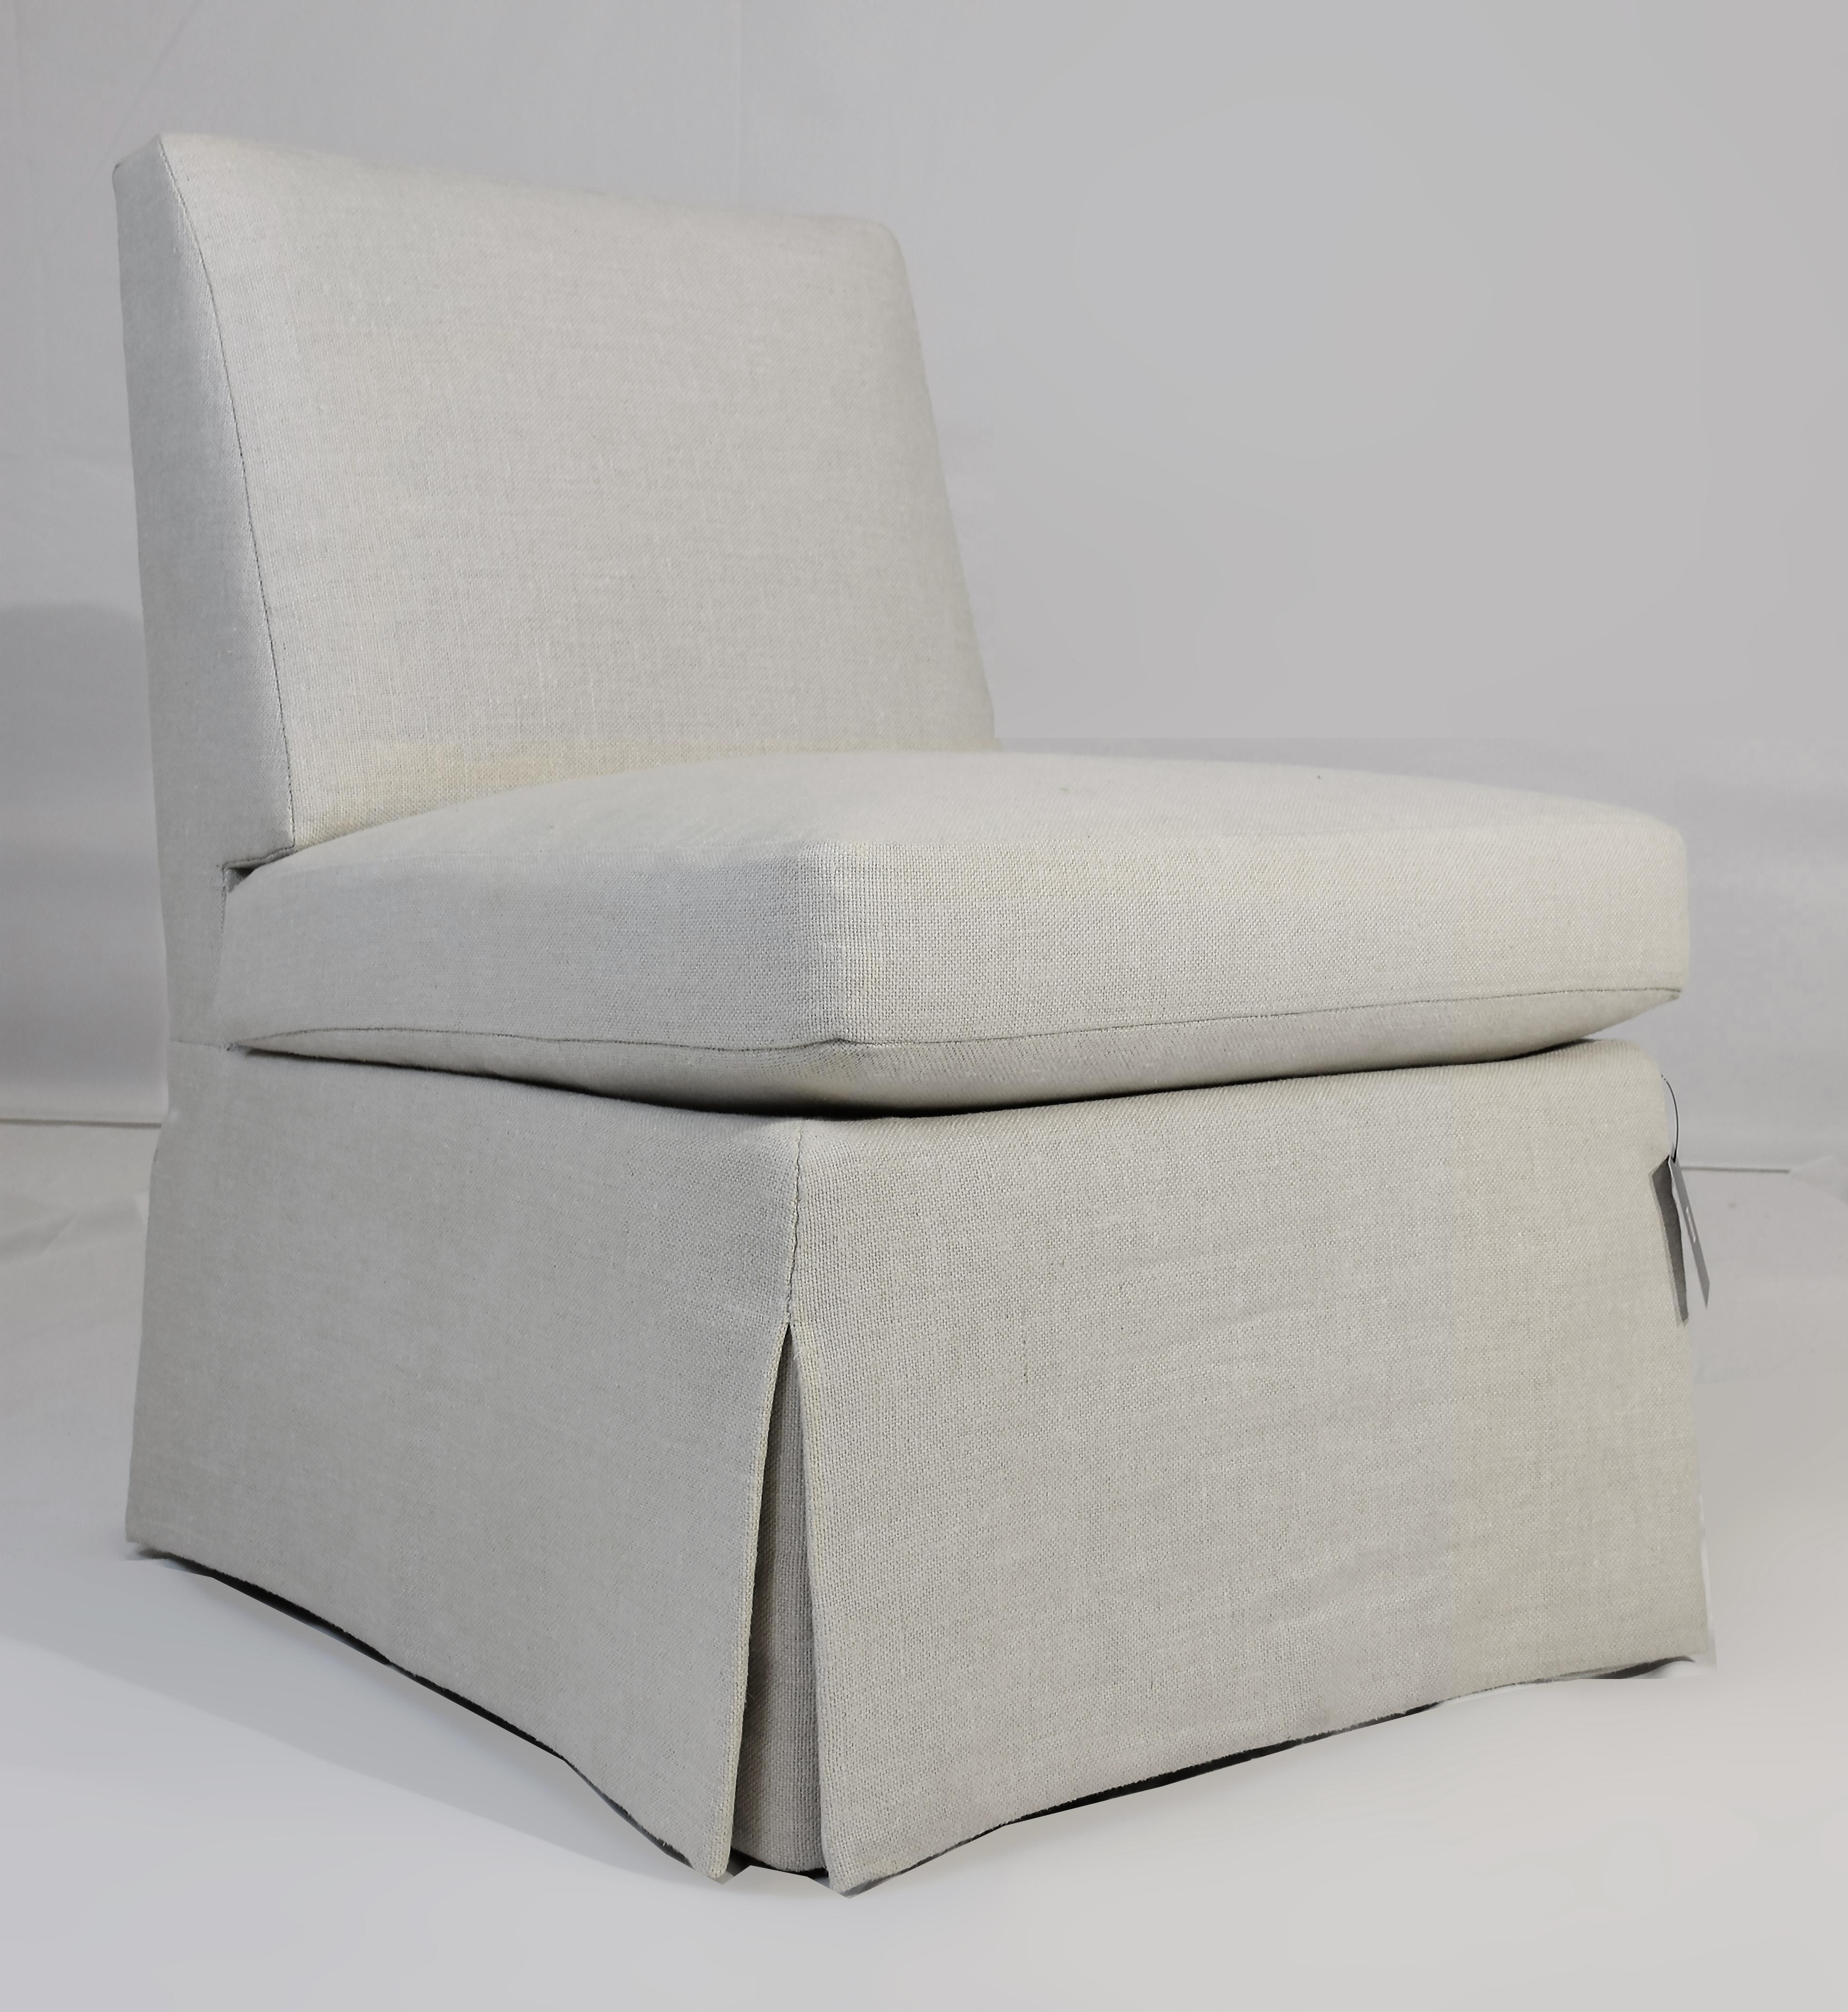 Le Jeune Upholstery Ella Slipper Chair Floor Sample in Ivory

Offered for sale is a floor model from Le Jeune Upholstery for the Ella Slipper Chair. The armless slipper chair has s loose cushion seat. The cores are foam wrapped in down and feathers